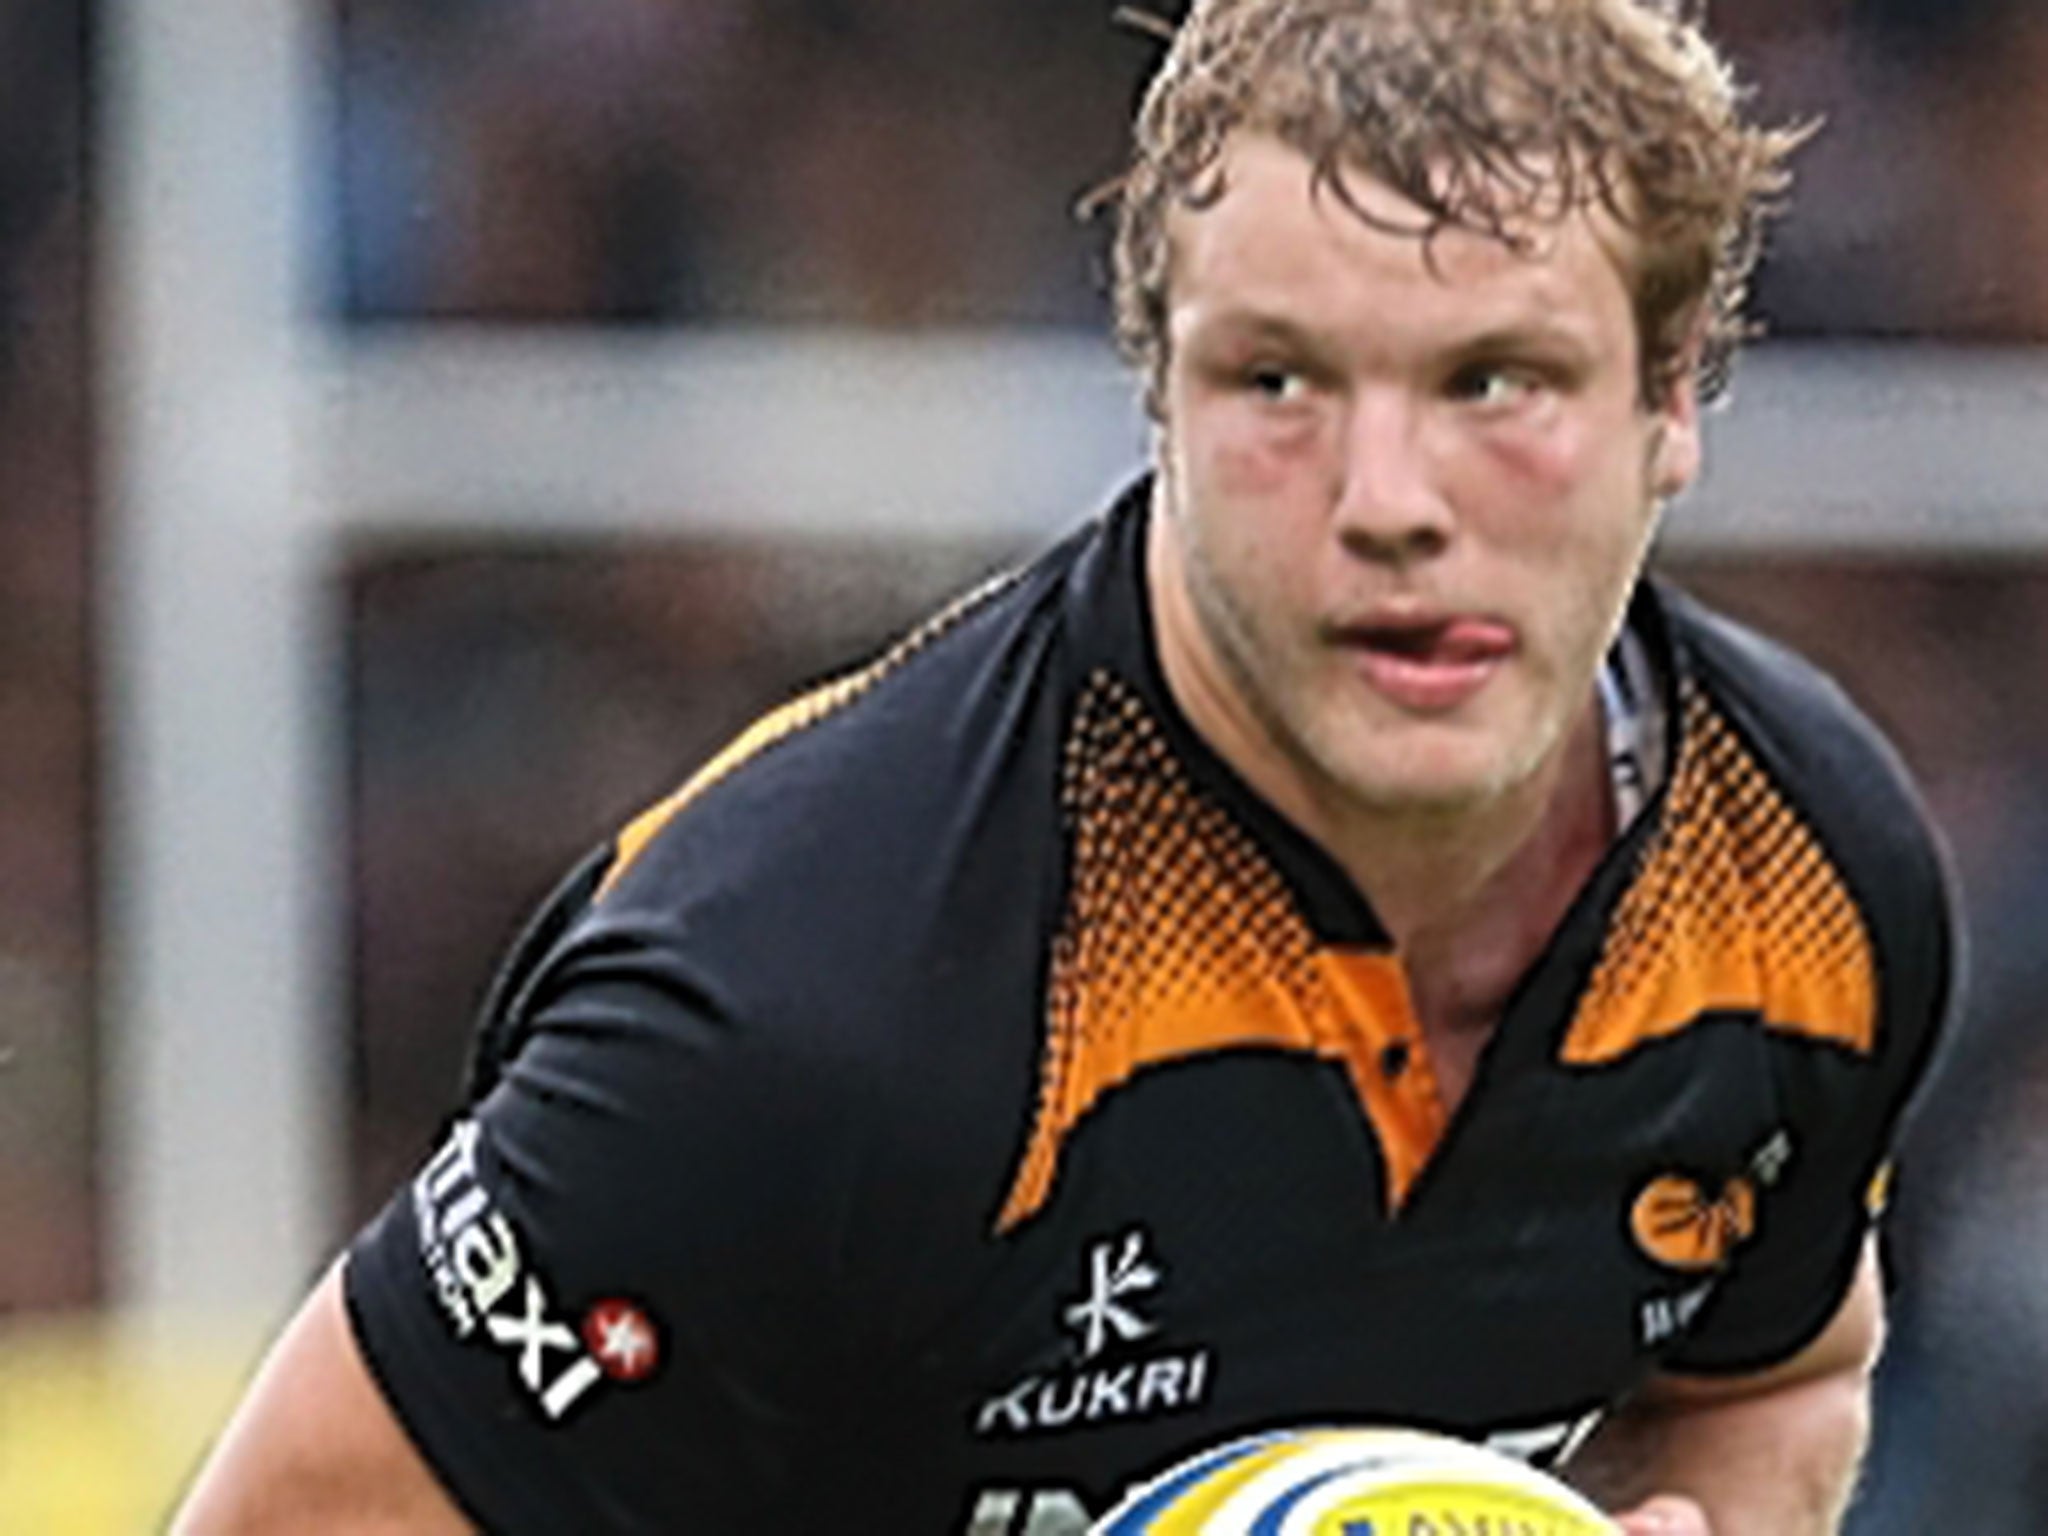 Joe Lauchbury signed a contract extension with Wasps on Friday